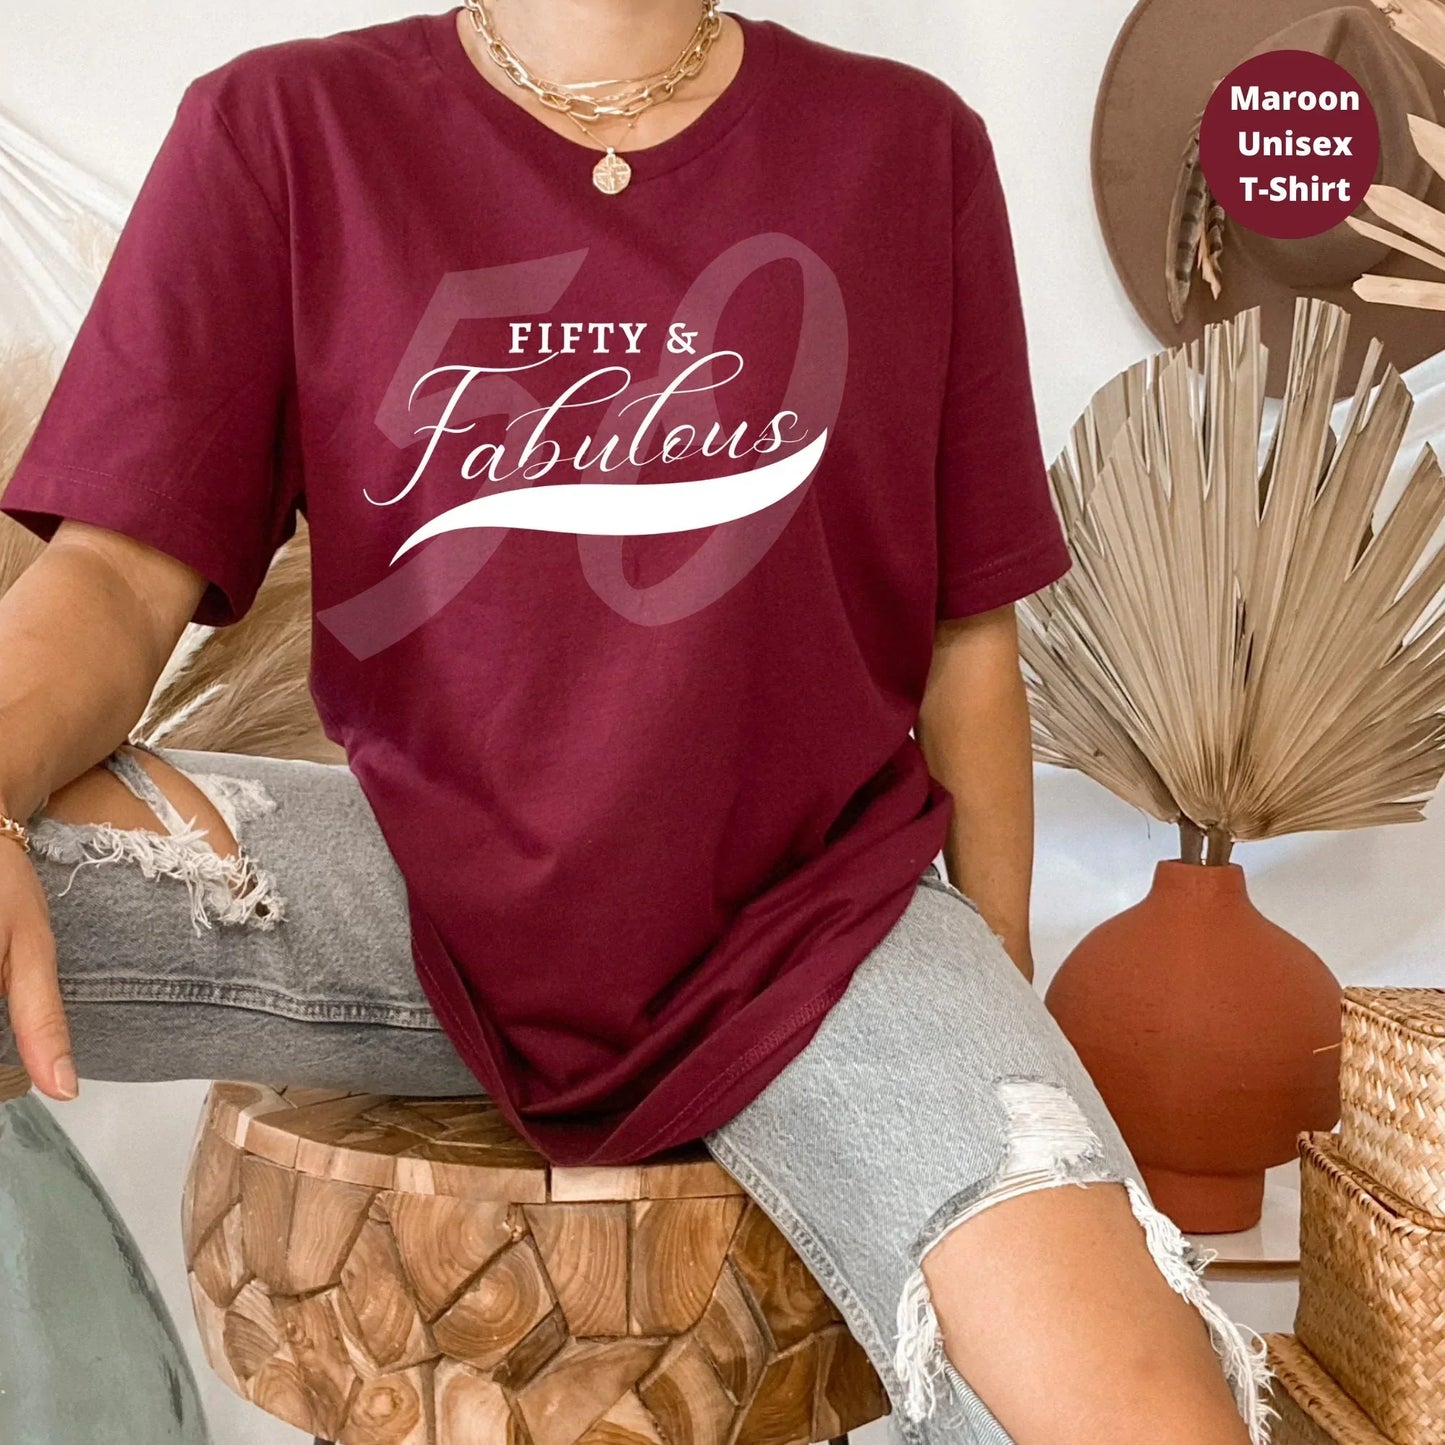 Fifty and Fabulous Shirt, 50th Birthday Shirt - Celebrate Your Milestone in Style! HMDesignStudioUS